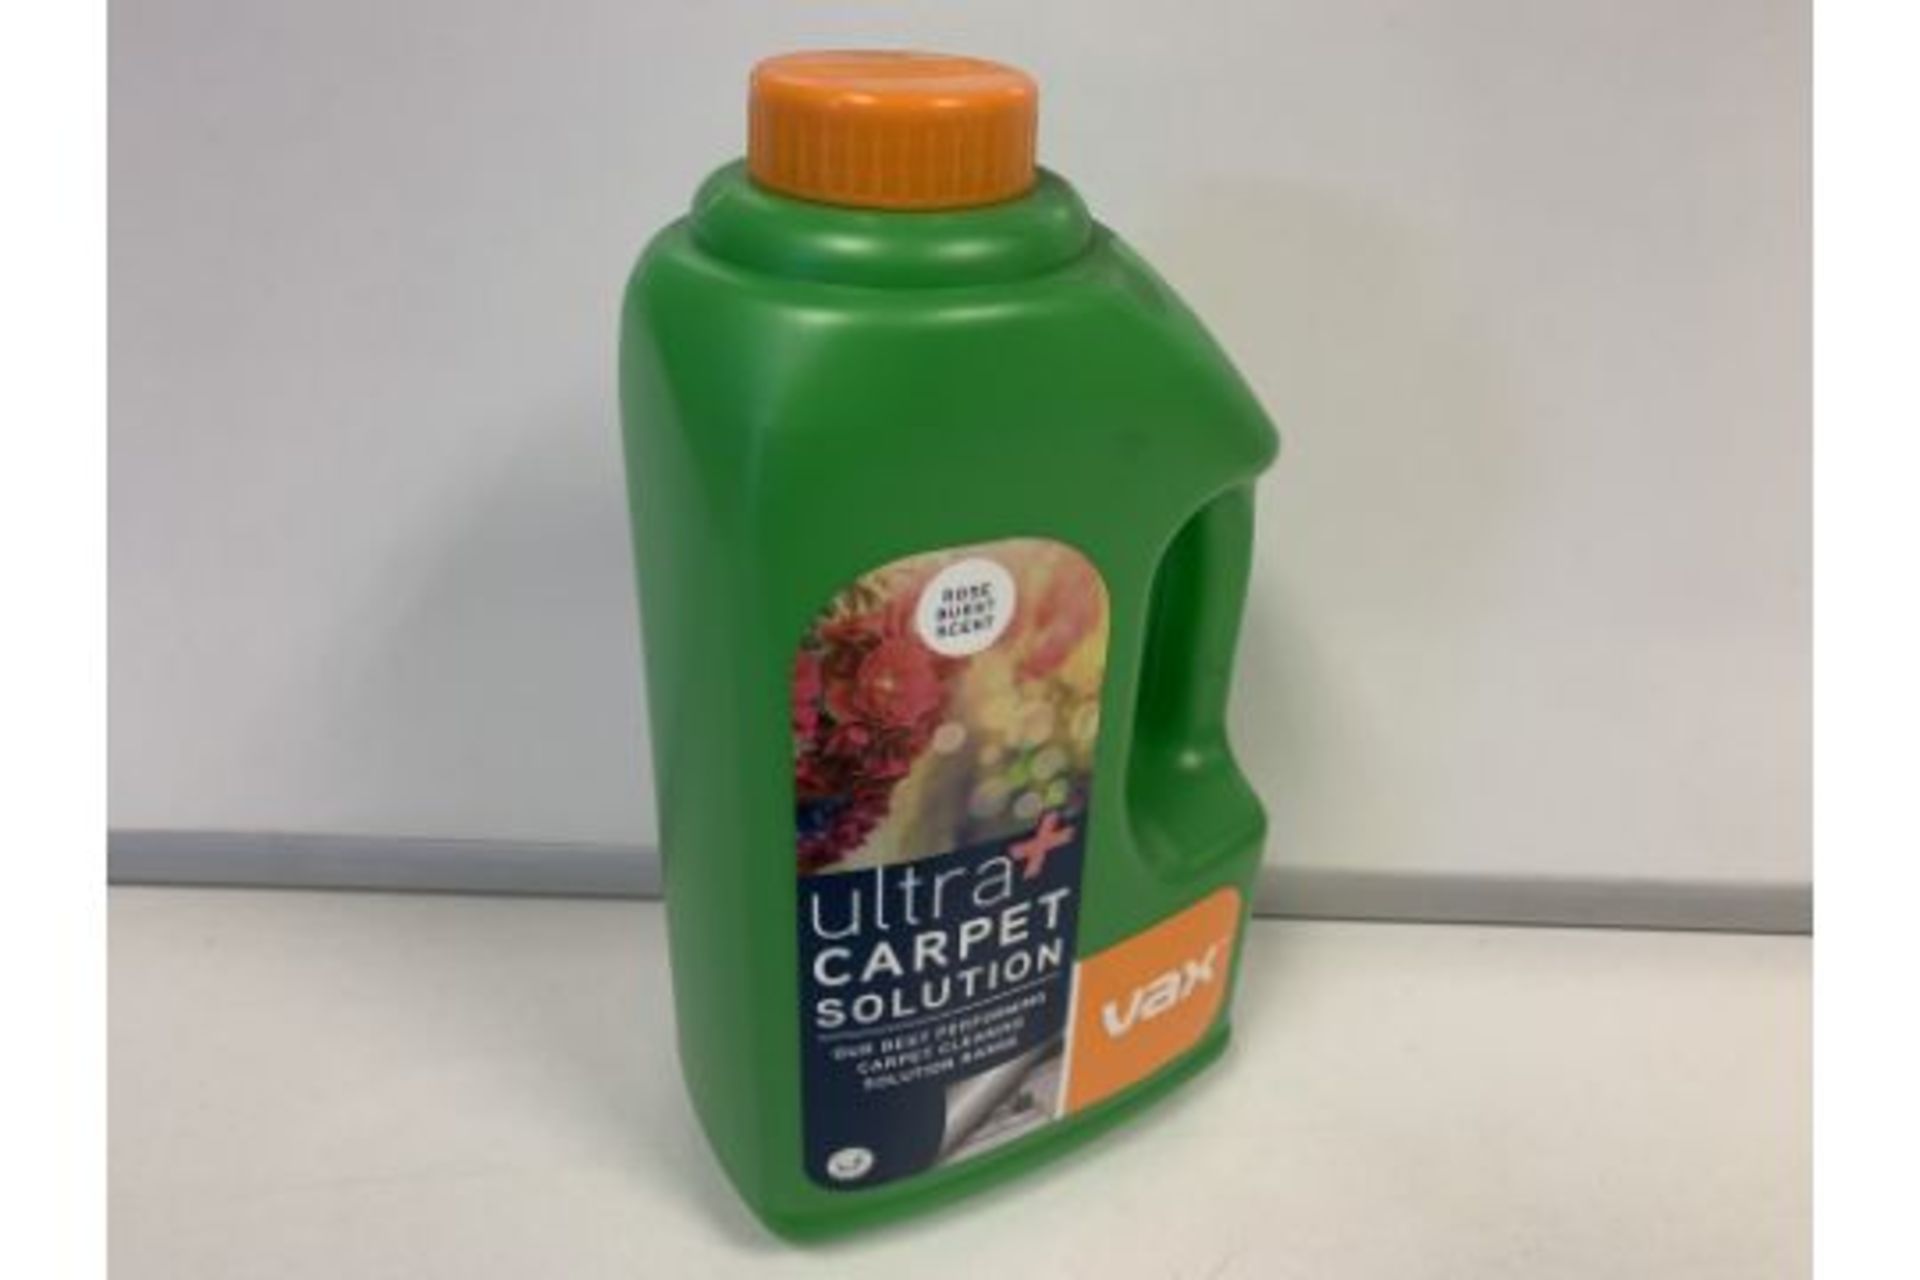 10 x NEW 1.5L VAX ULTRA + CARPET SOLUTION. OUR BEST PERFORMING CARPET CLEANING SOLUTION RANGE